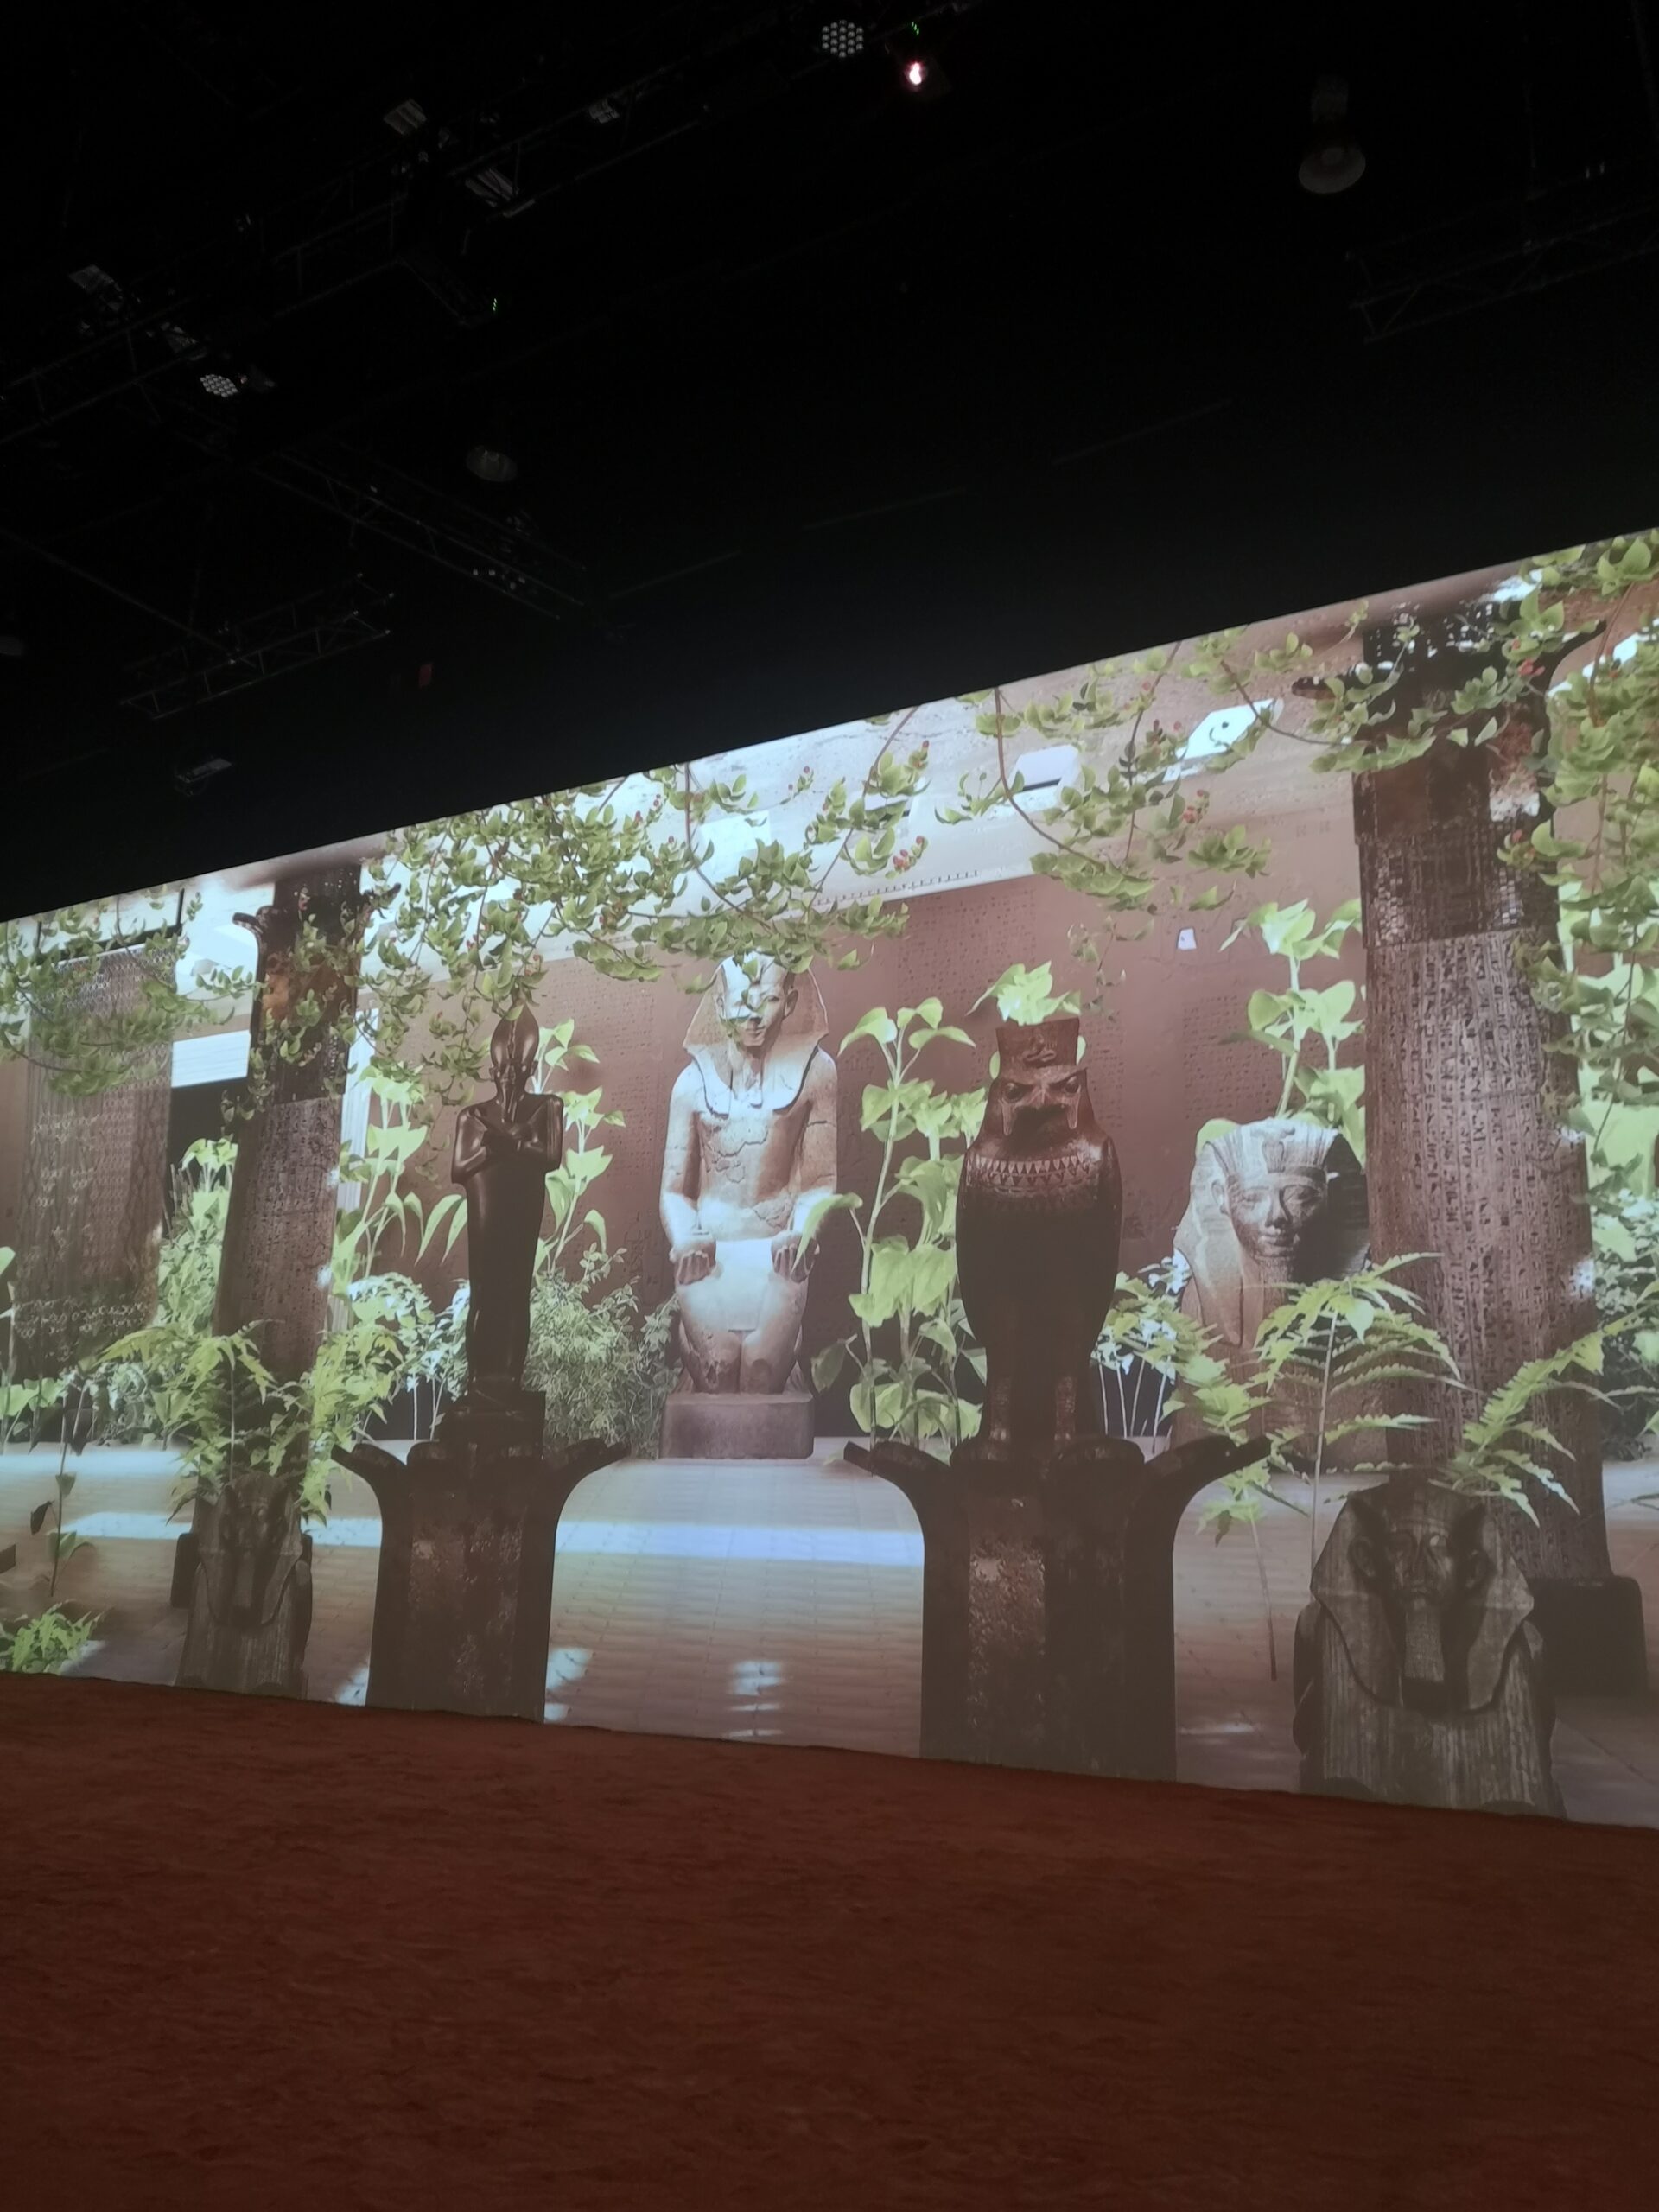 Image of Immersive Tut. A garden with different ancient Egyptian statues appears on the wall.